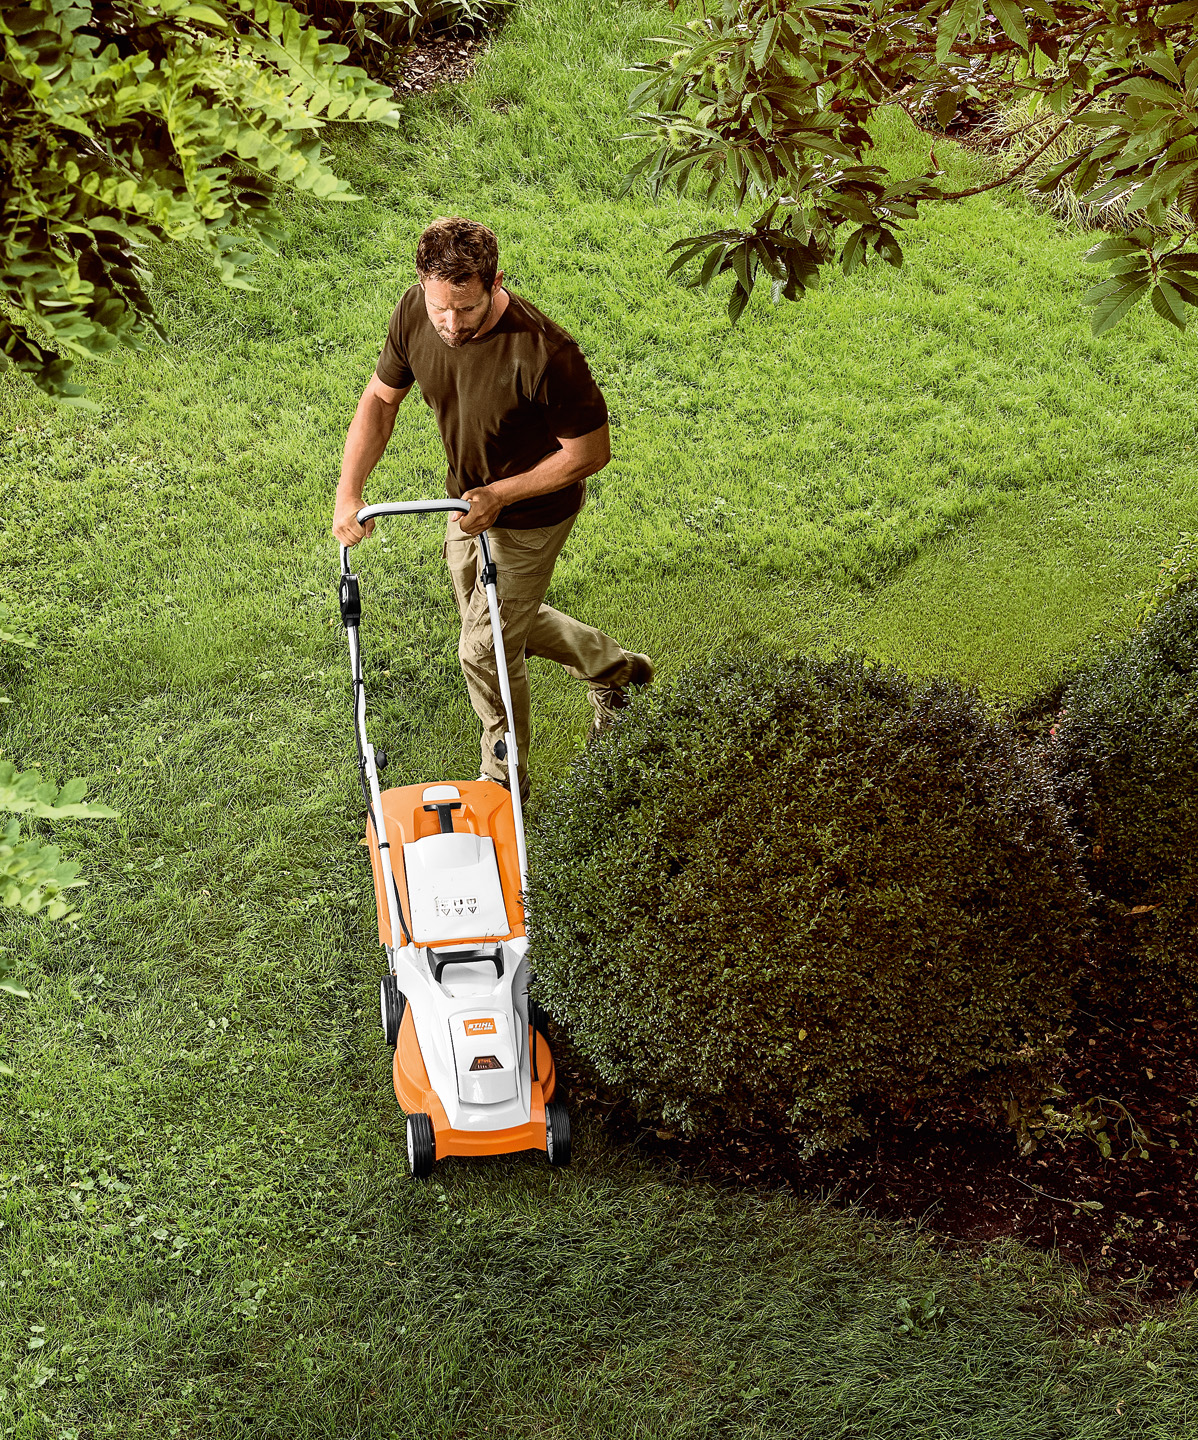 View from above: Man mowing a lawn around a small tree with the STIHL RMA 235 cordless lawn mower.